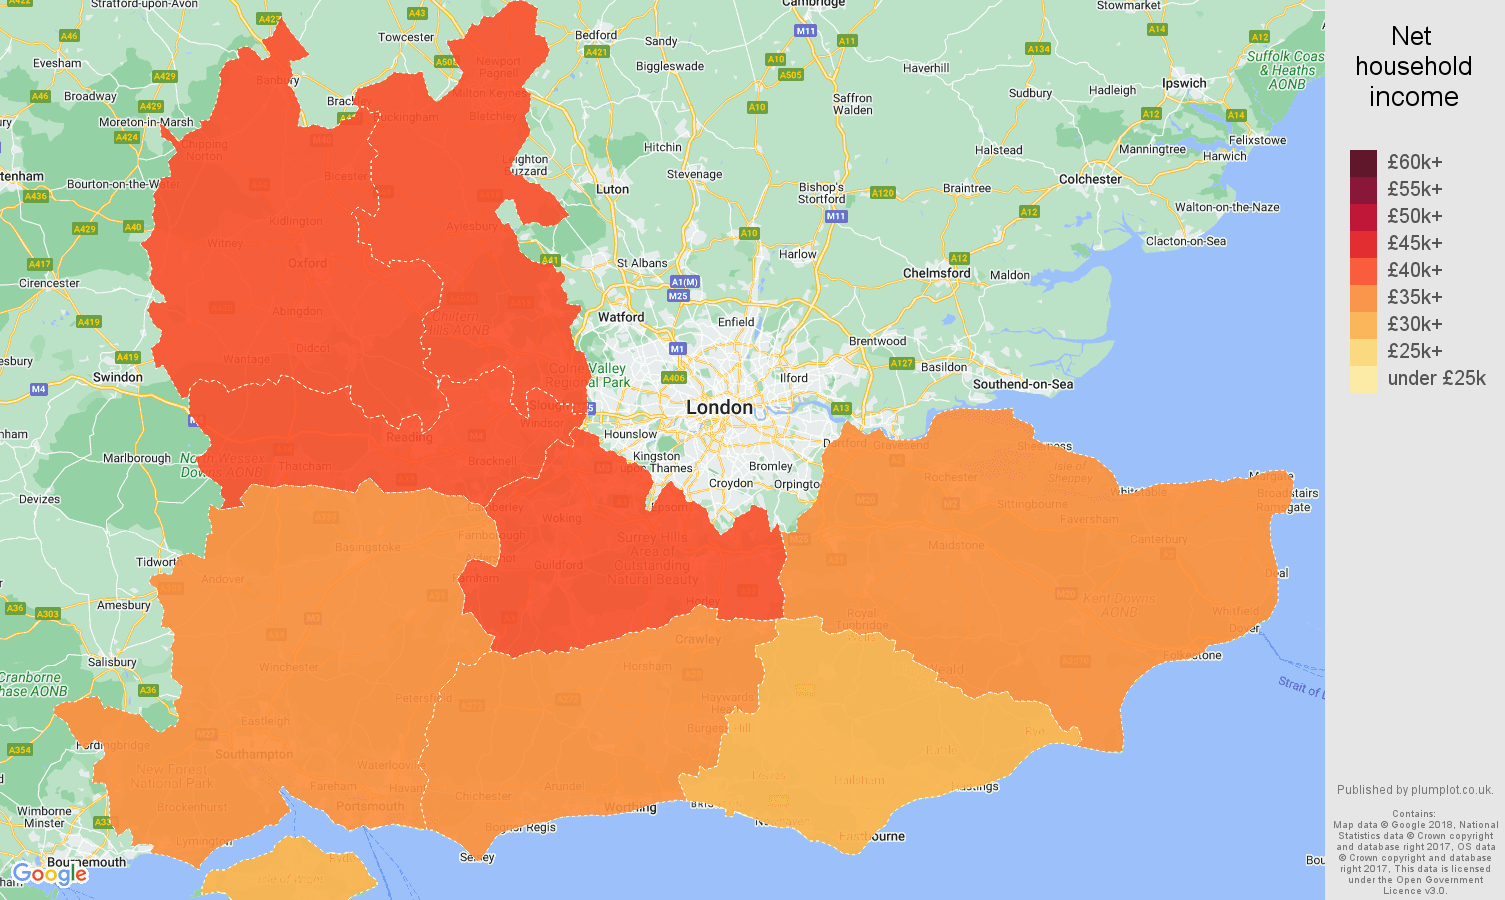 South East net household income map